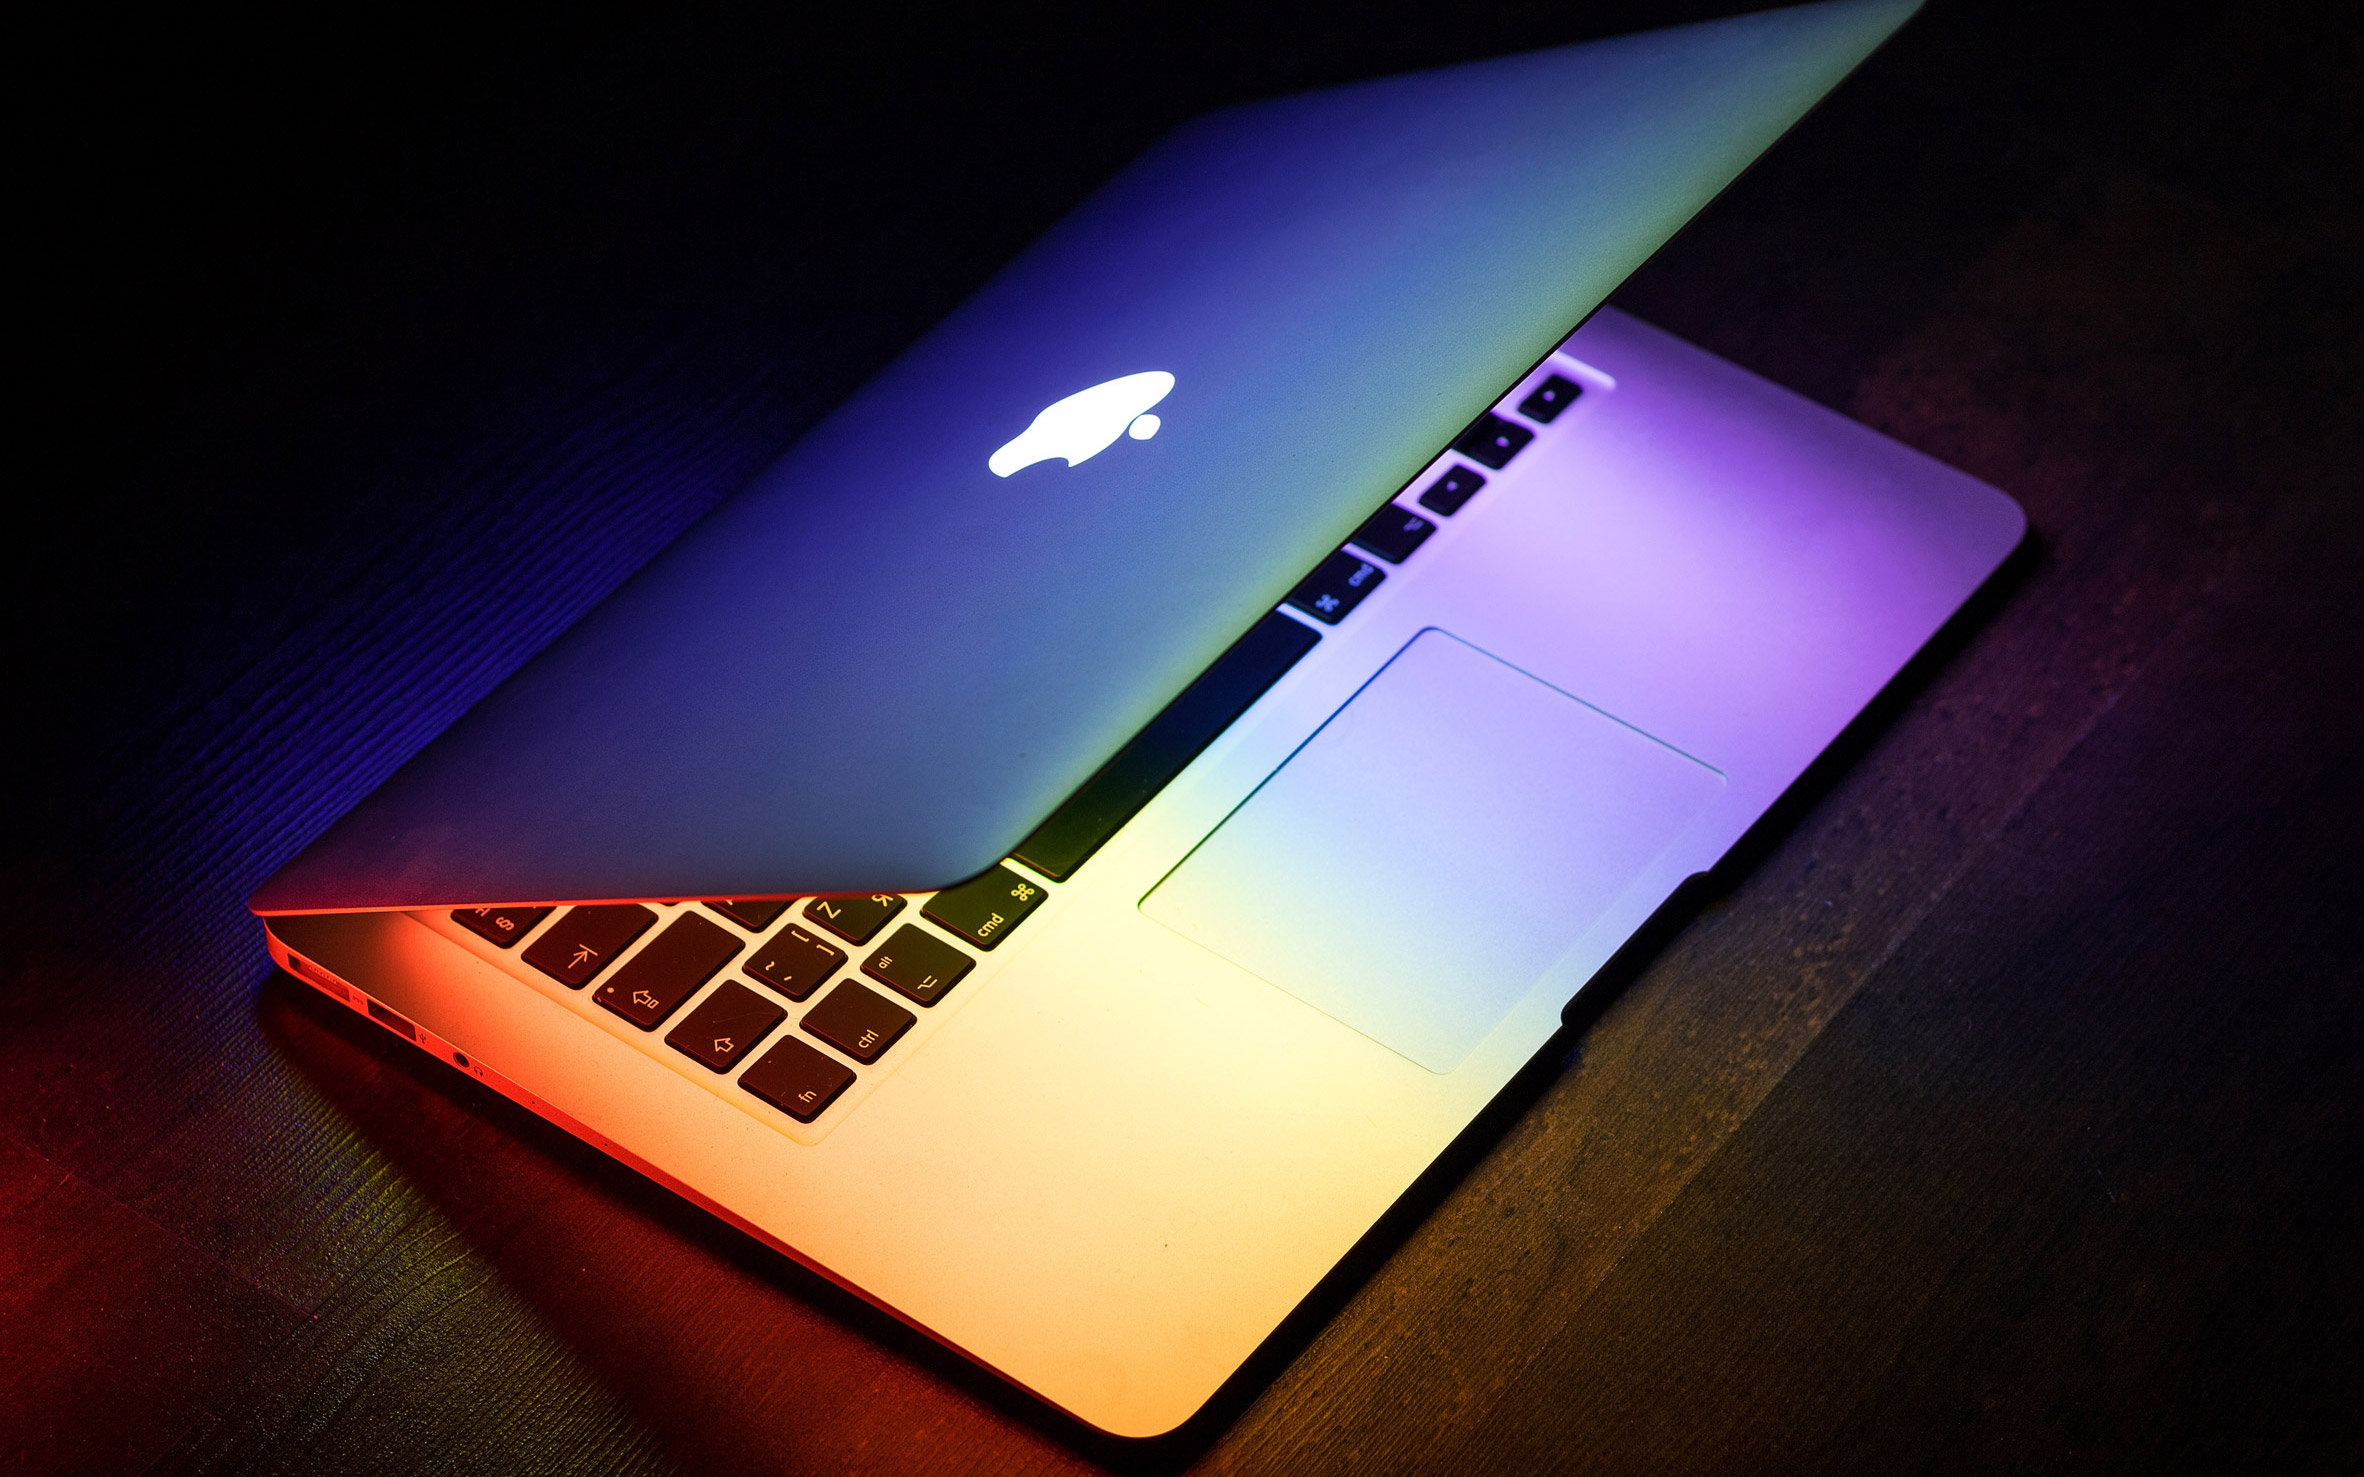 MacBook Pro Users will be Compensated